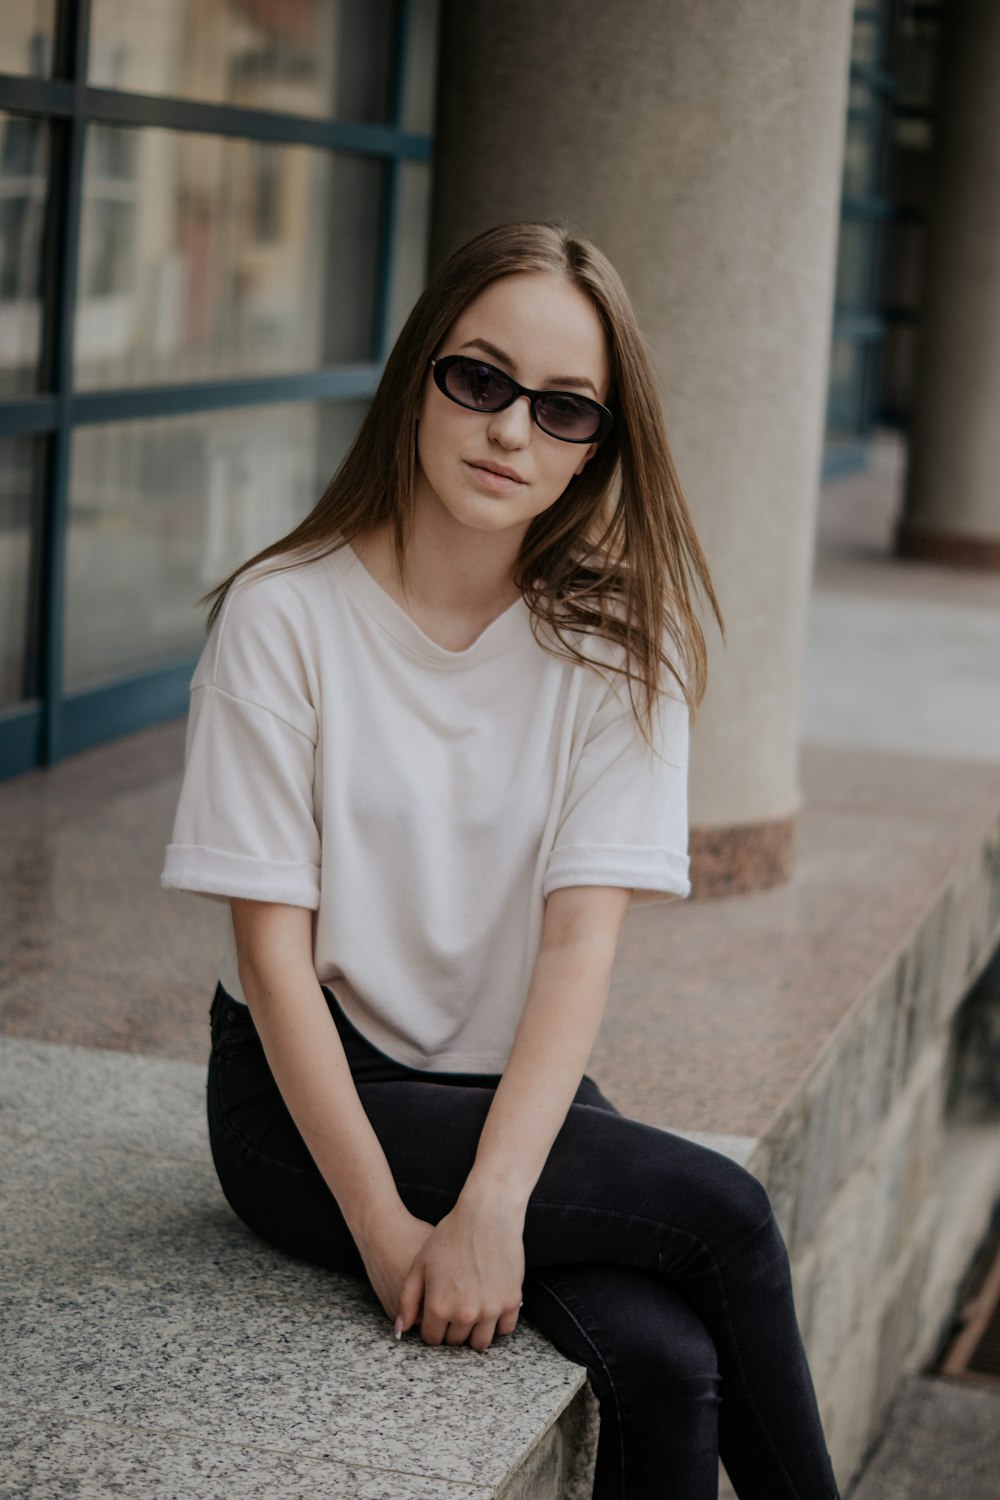 George Hanbury Automatisk kolbøtte woman in white crew neck t-shirt and black pants sitting on concrete bench  photo – Free Clothing Image on Unsplash